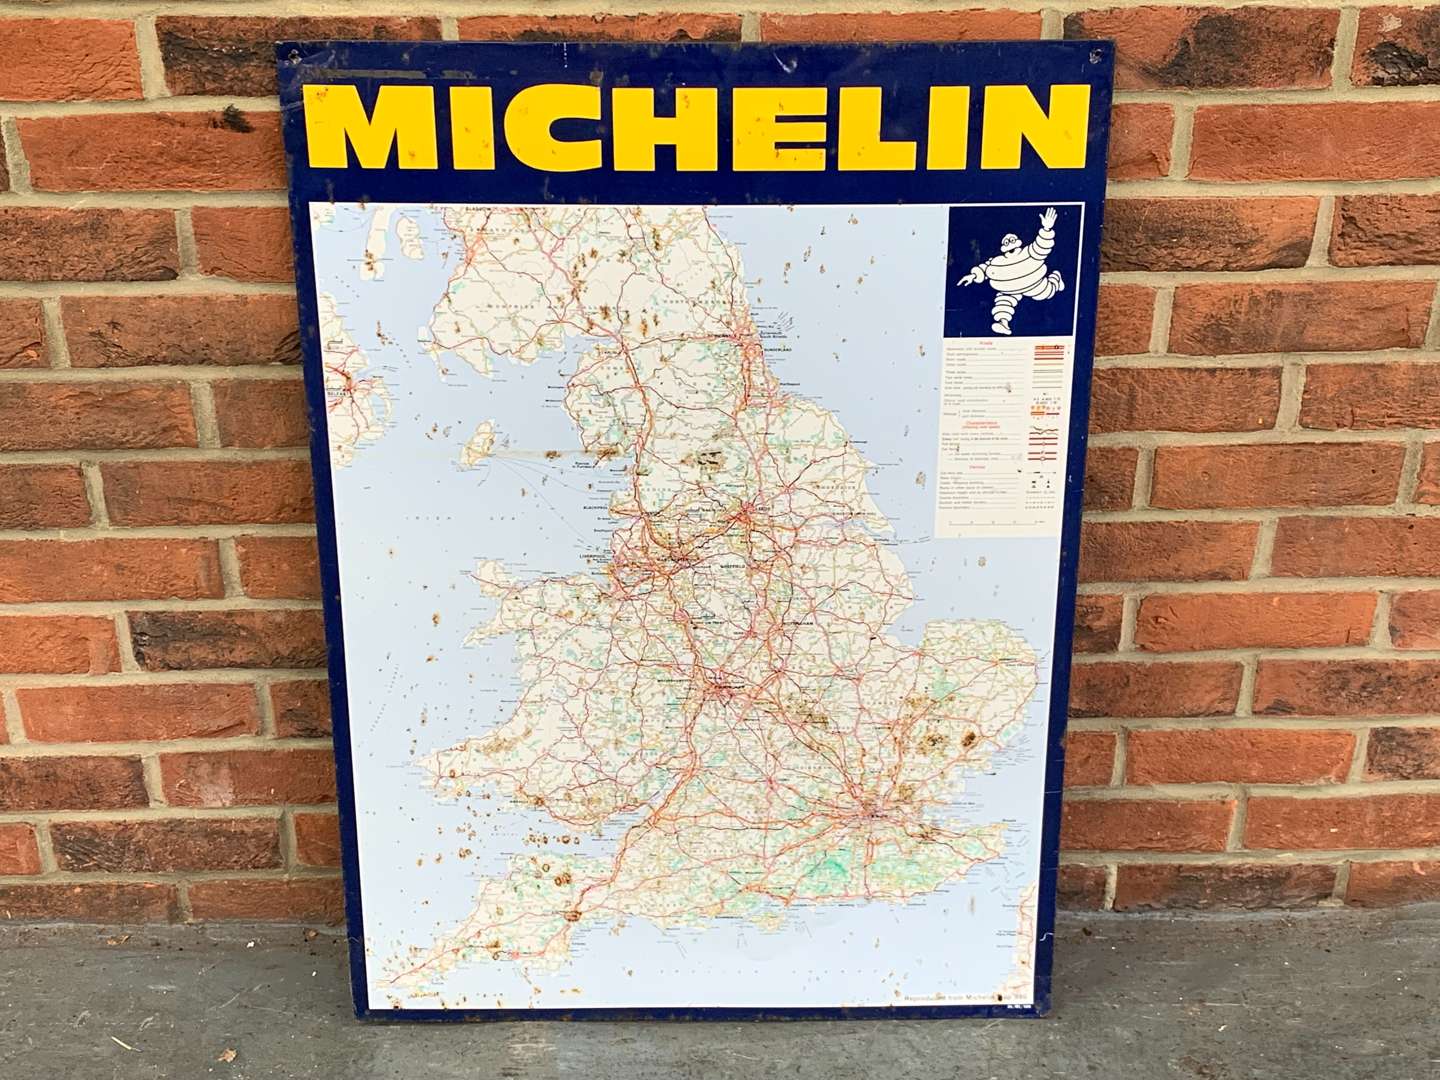 <p>Tin Michelin Map, Tyre Pressure Chart Signs</p>